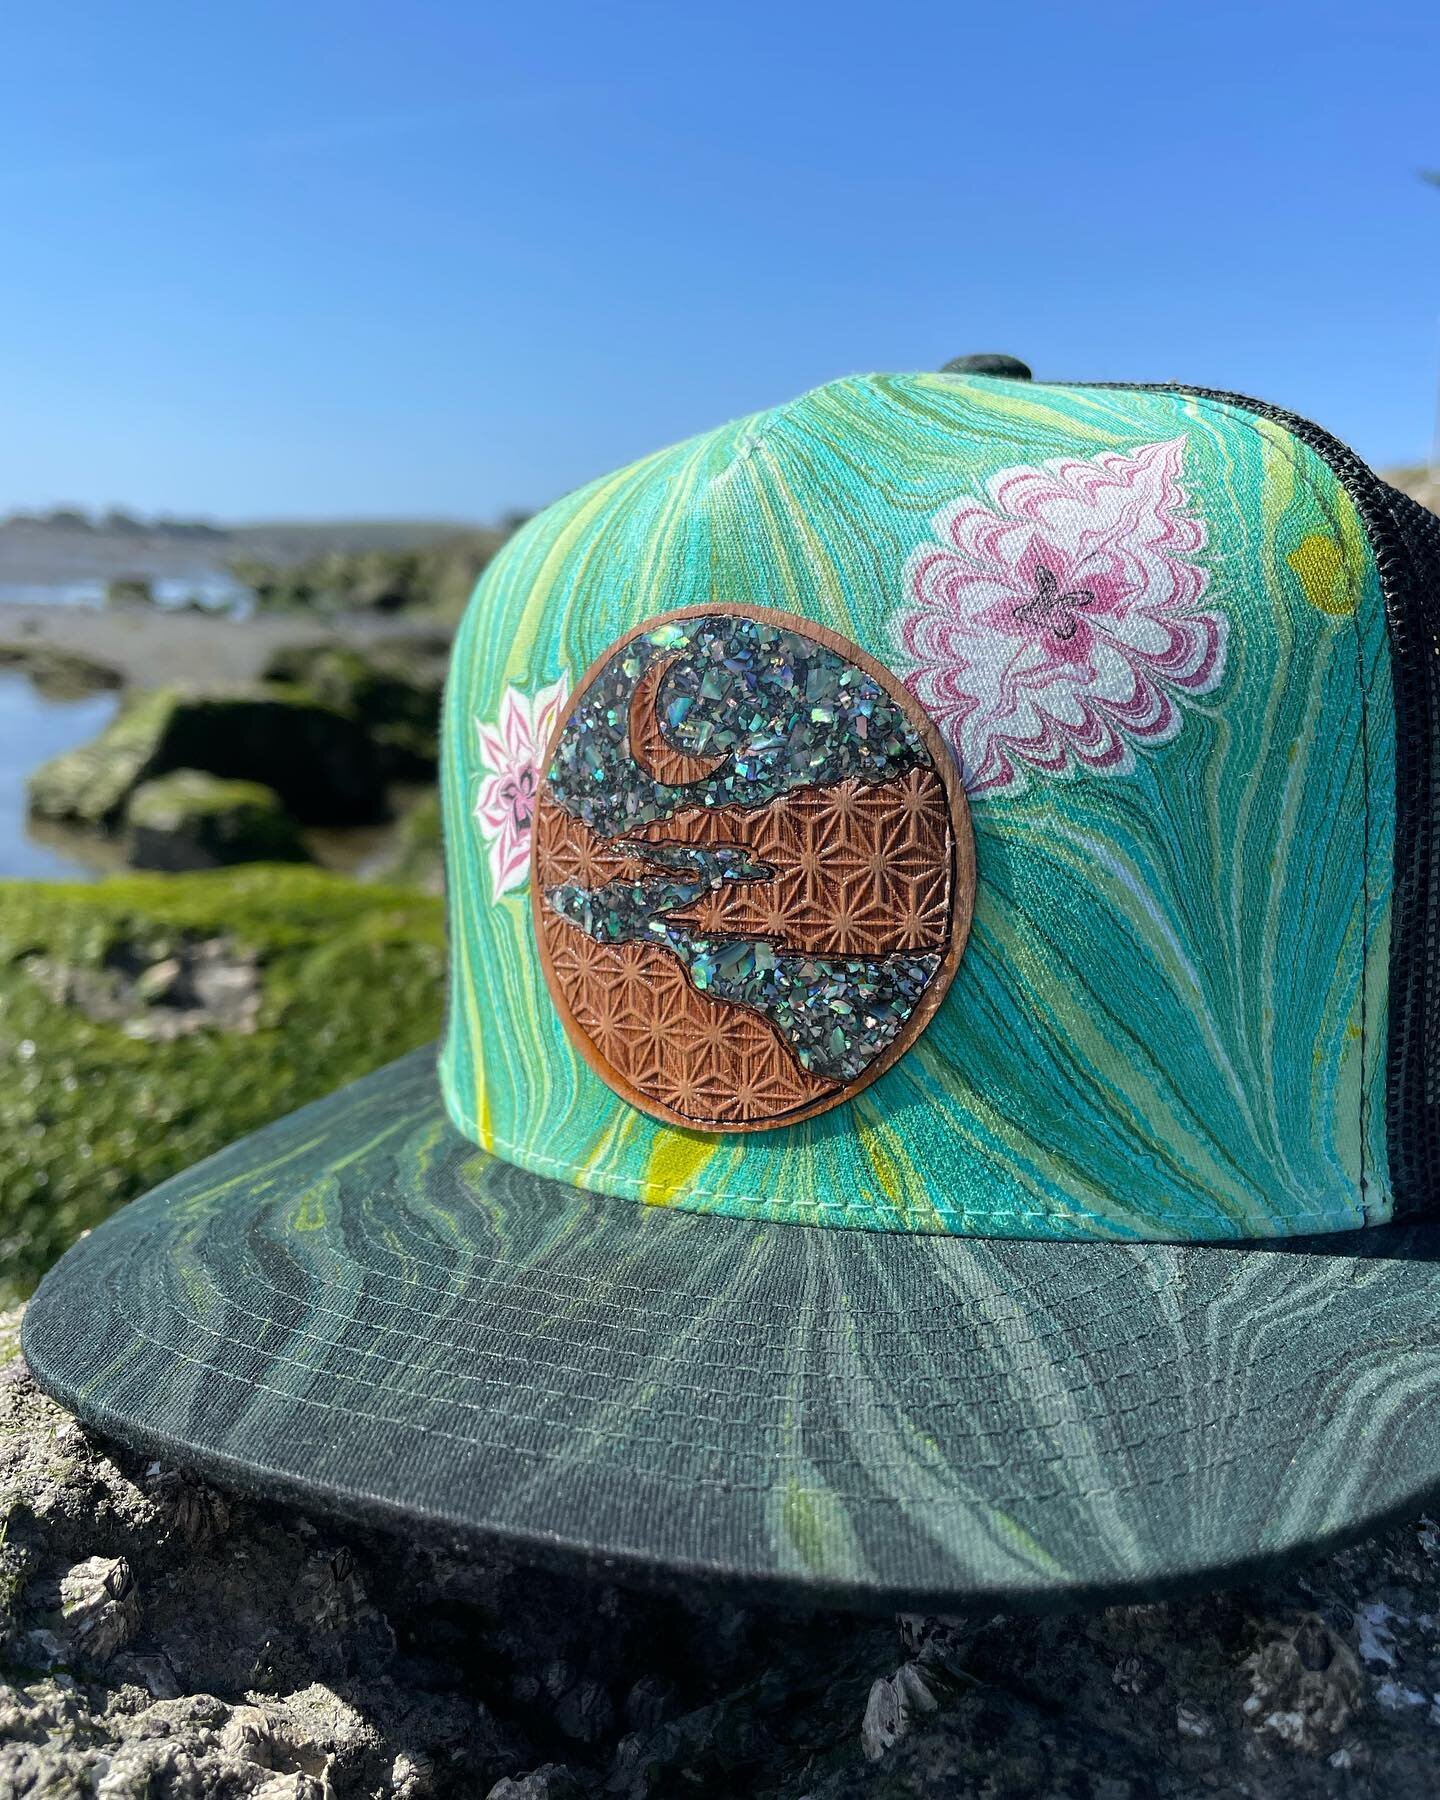 This abalone is unreal! It&rsquo;s incredible to create with! Check out some of my new creations. See one you like DM me! 

Which one is your favorite? 

#domchi #abalone #abaloneinlay #customhats #hats #art #creation